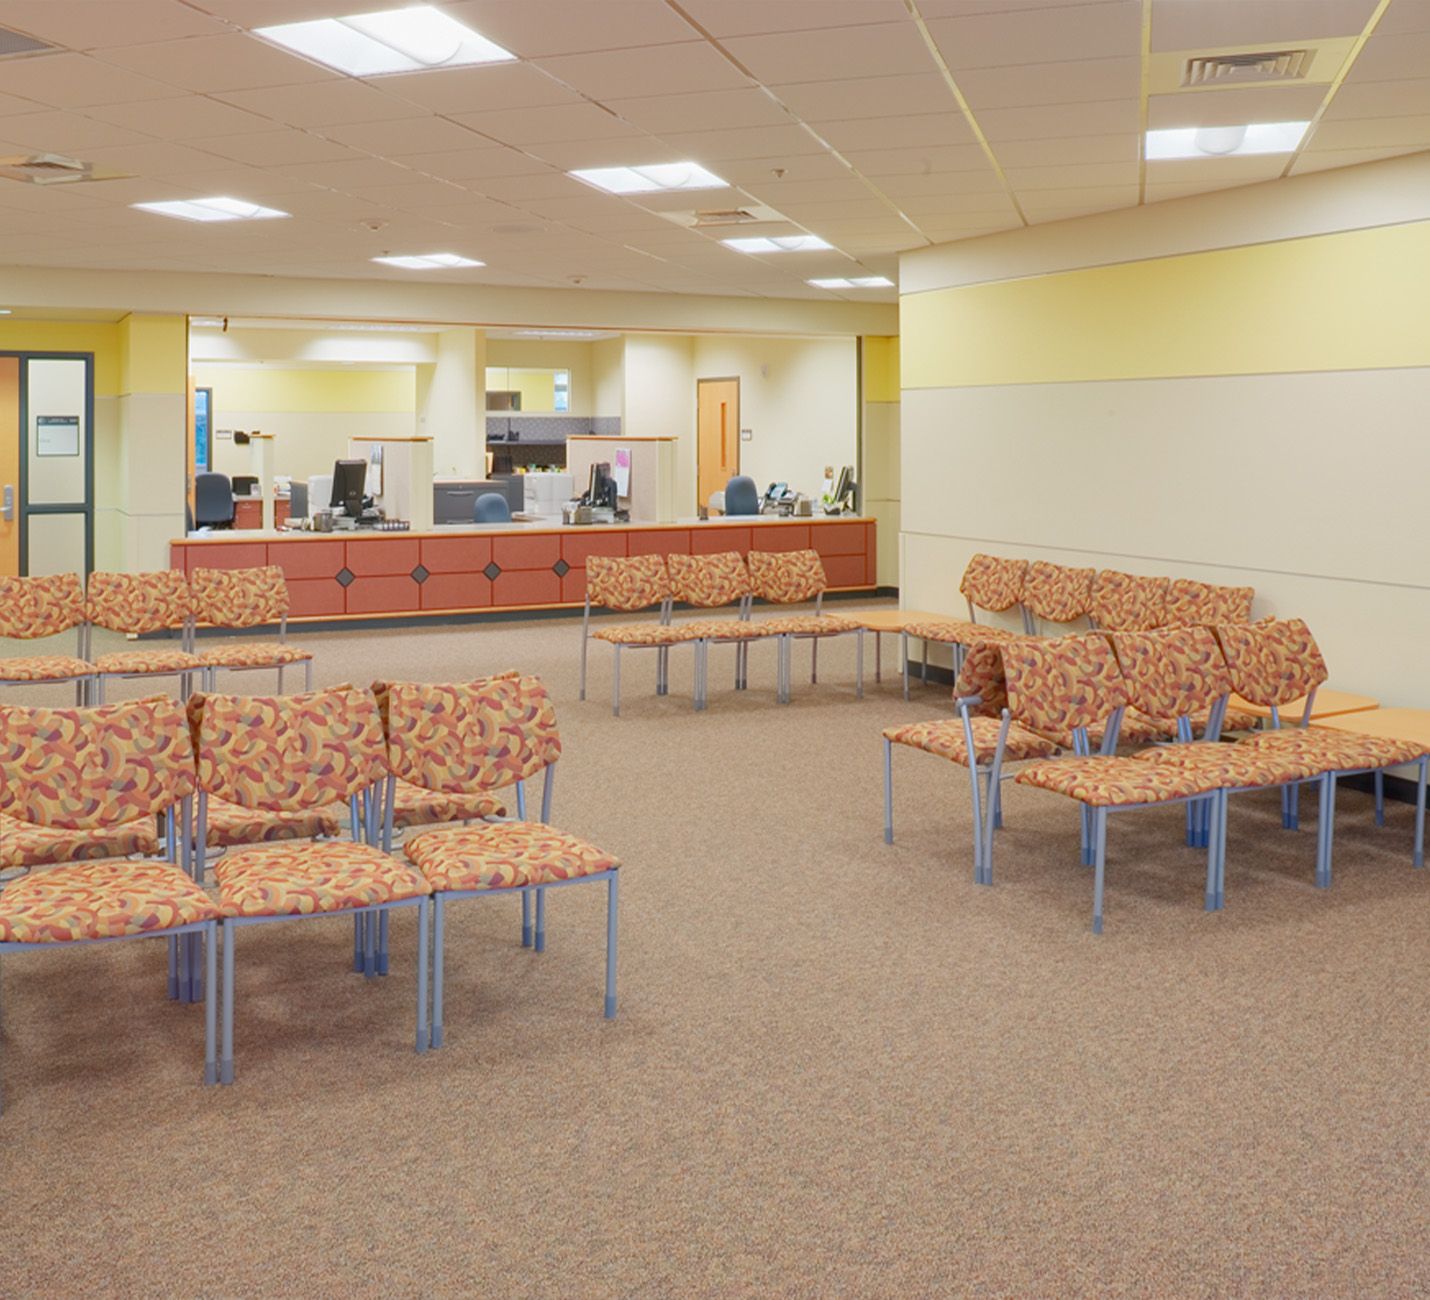 Clark County Center Comity Health inside looking at waiting area and nurses desk